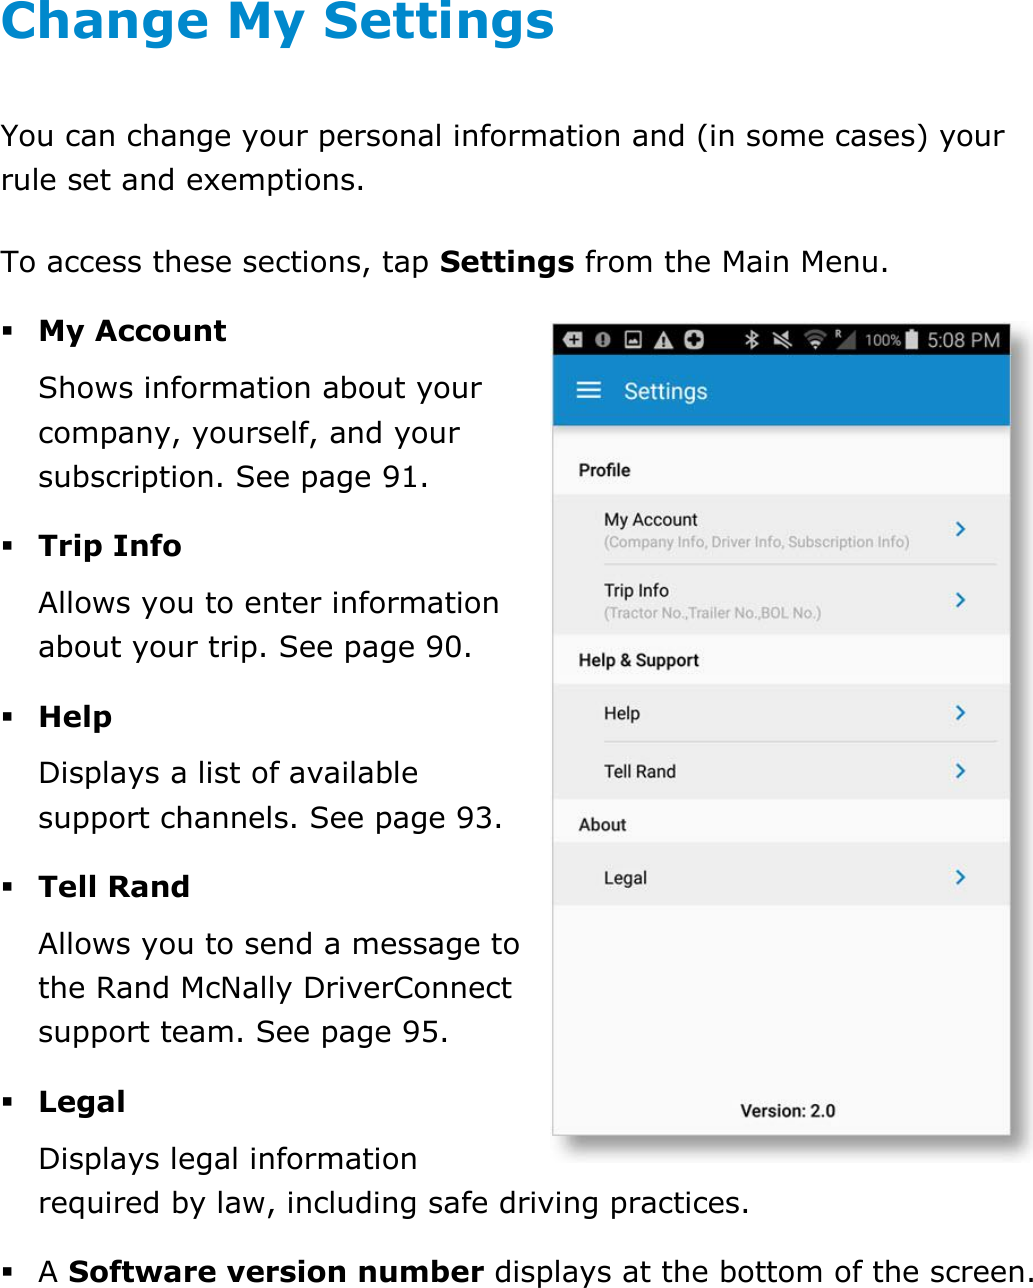  DriverConnect User Guide  84 © 2017, Rand McNally, Inc. Change My Settings You can change your personal information and (in some cases) your rule set and exemptions. To access these sections, tap Settings from the Main Menu.  My Account Shows information about your company, yourself, and your subscription. See page 91.  Trip Info Allows you to enter information about your trip. See page 90.  Help Displays a list of available support channels. See page 93.  Tell Rand Allows you to send a message to the Rand McNally DriverConnect support team. See page 95.  Legal Displays legal information required by law, including safe driving practices.  A Software version number displays at the bottom of the screen.    